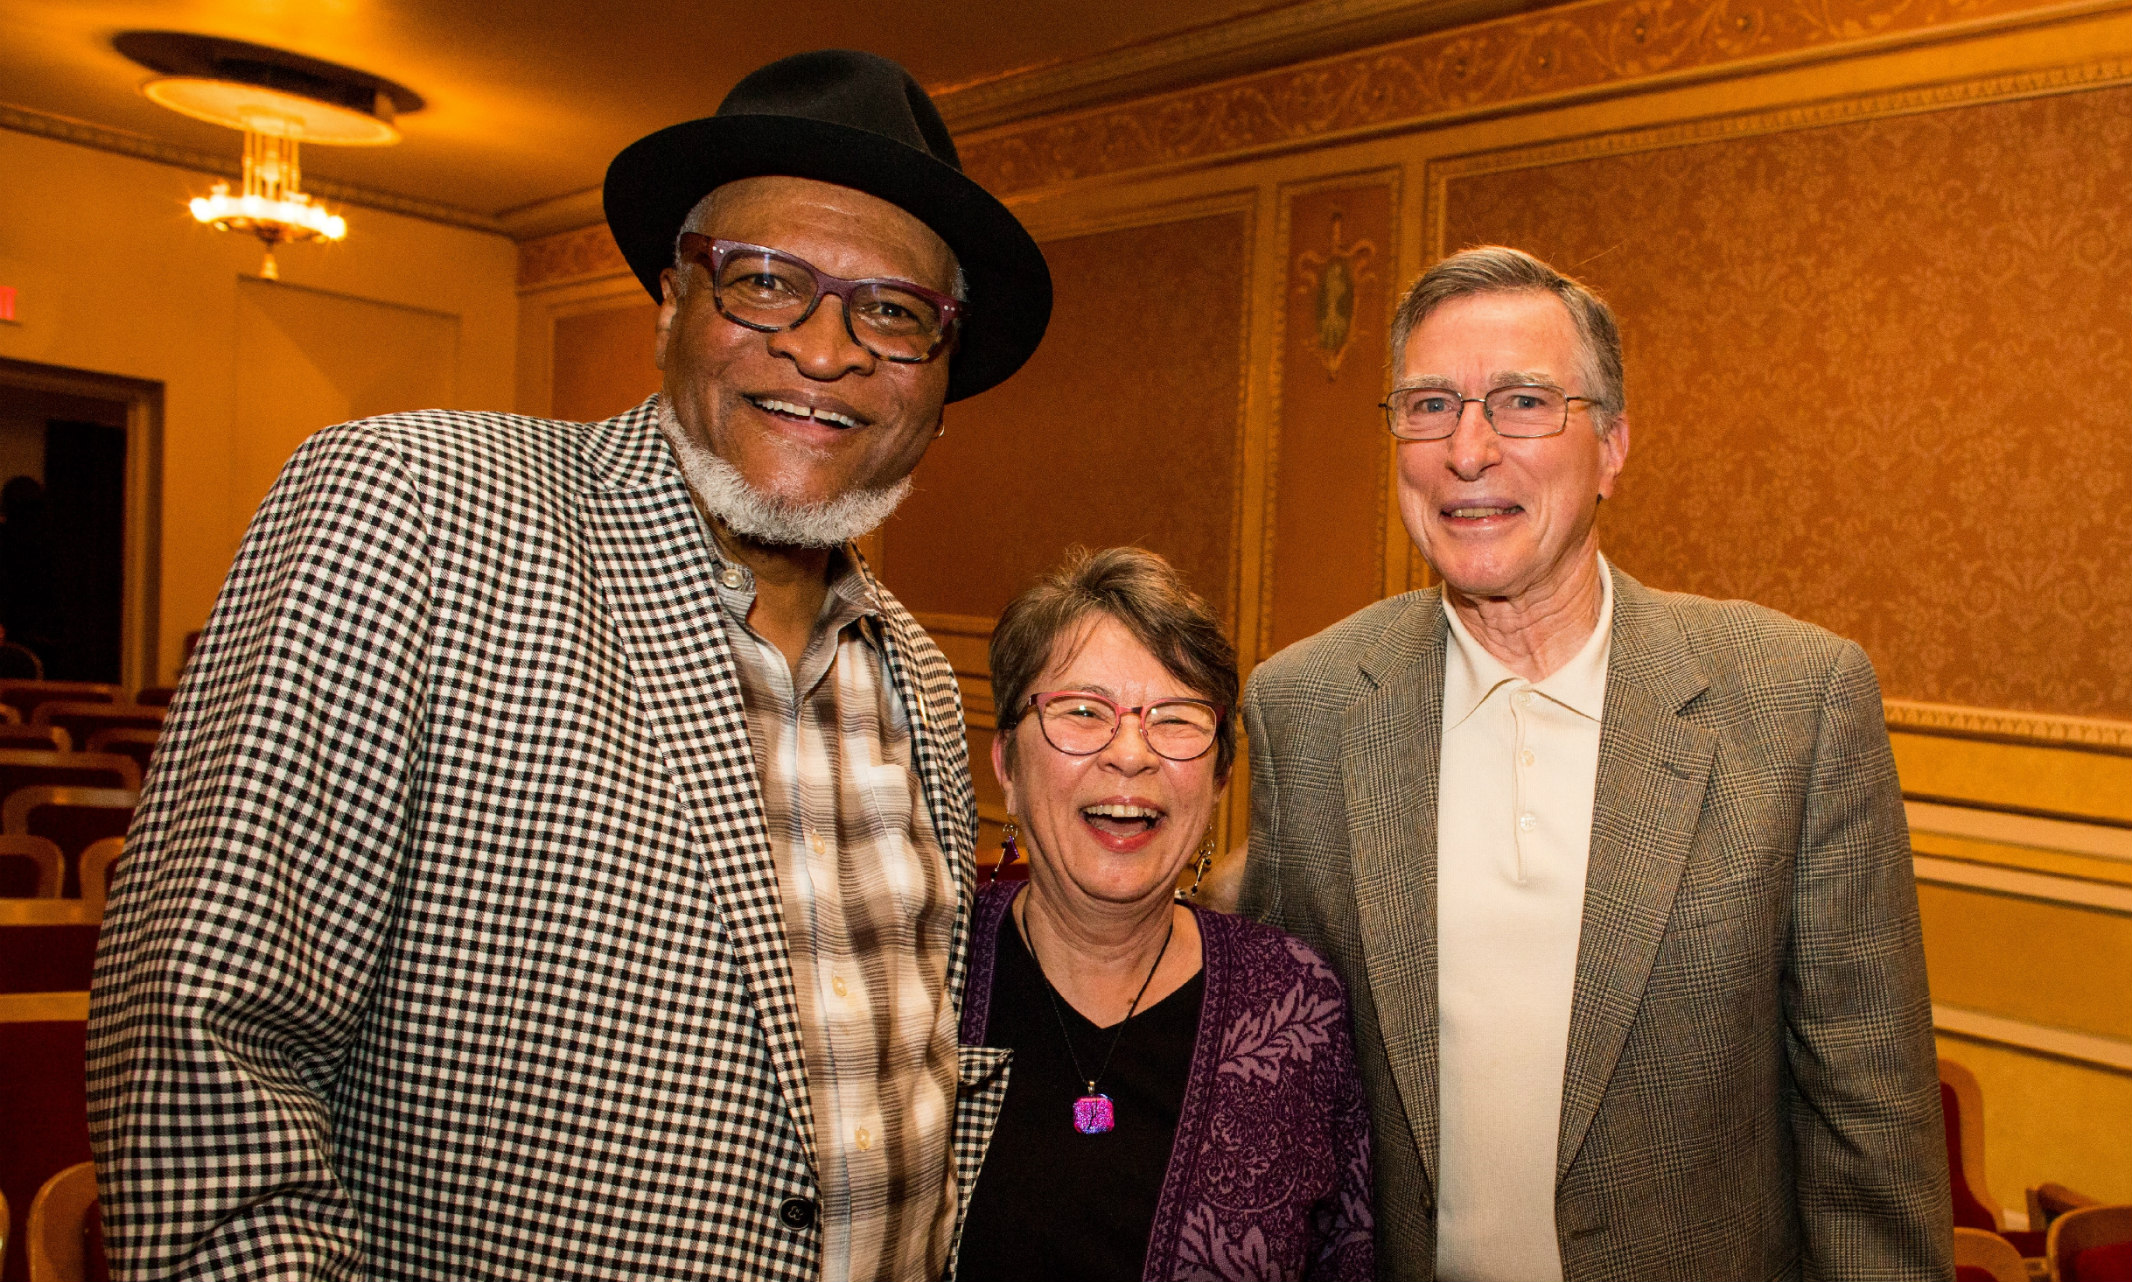 Bobby Watson with Sarah and Jim Weitzel